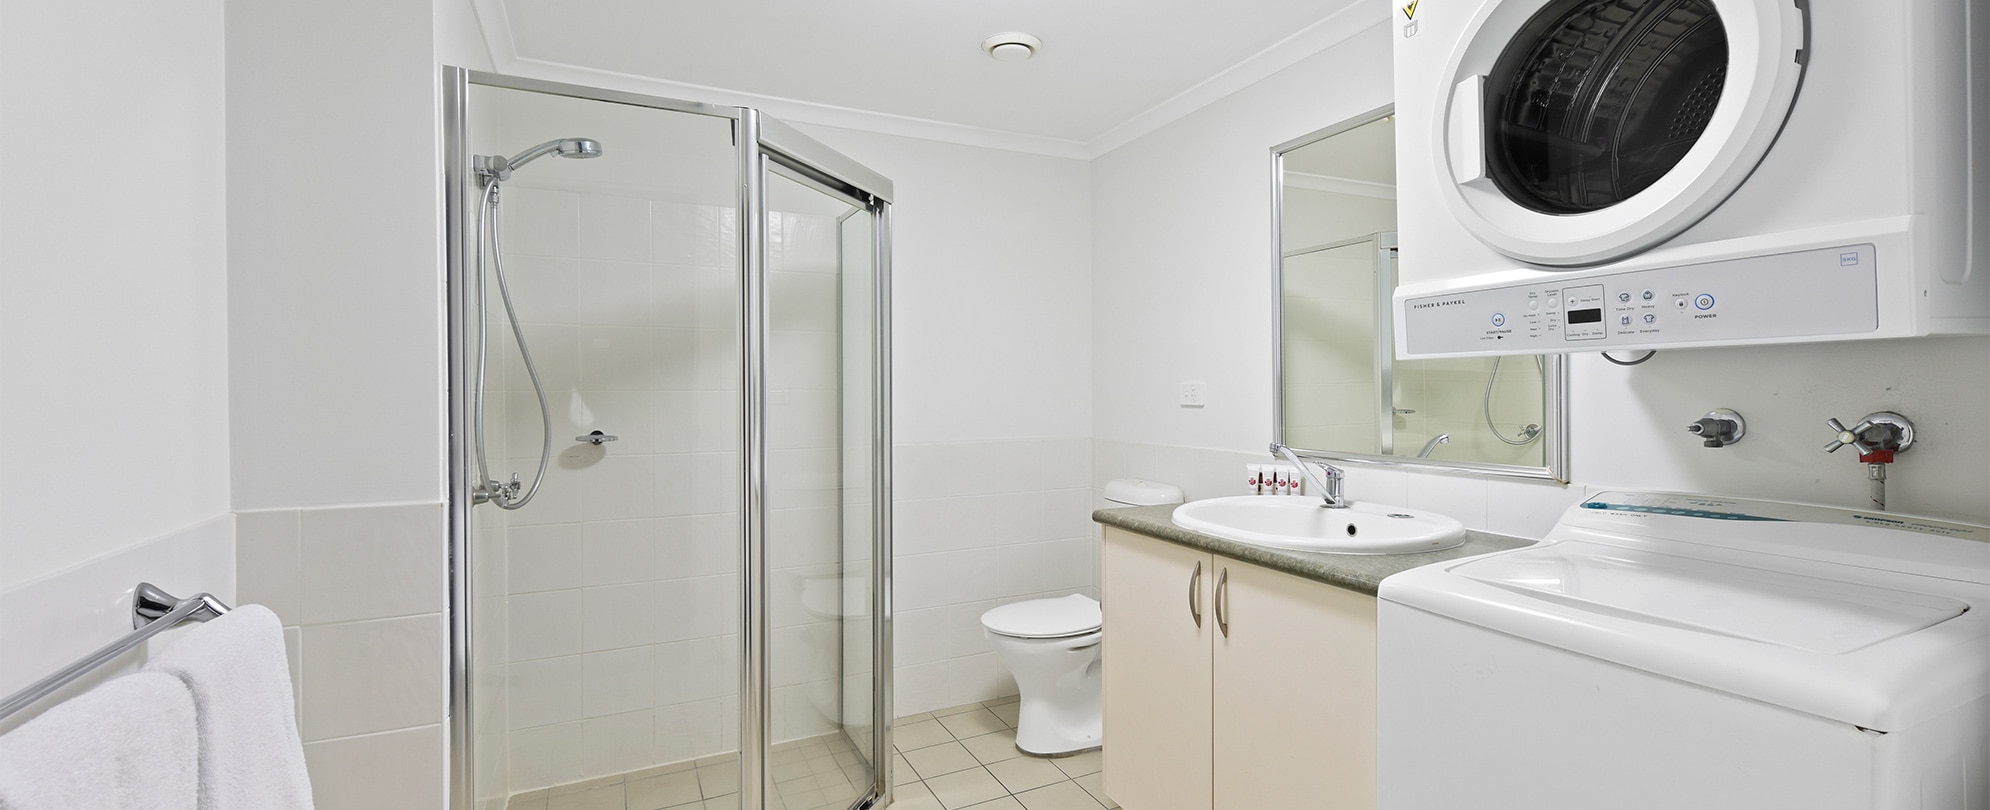 A bathroom with a shower, toilet, vanity, and washing and drying machine in a Club Wyndham Flynns Beach standard suite.